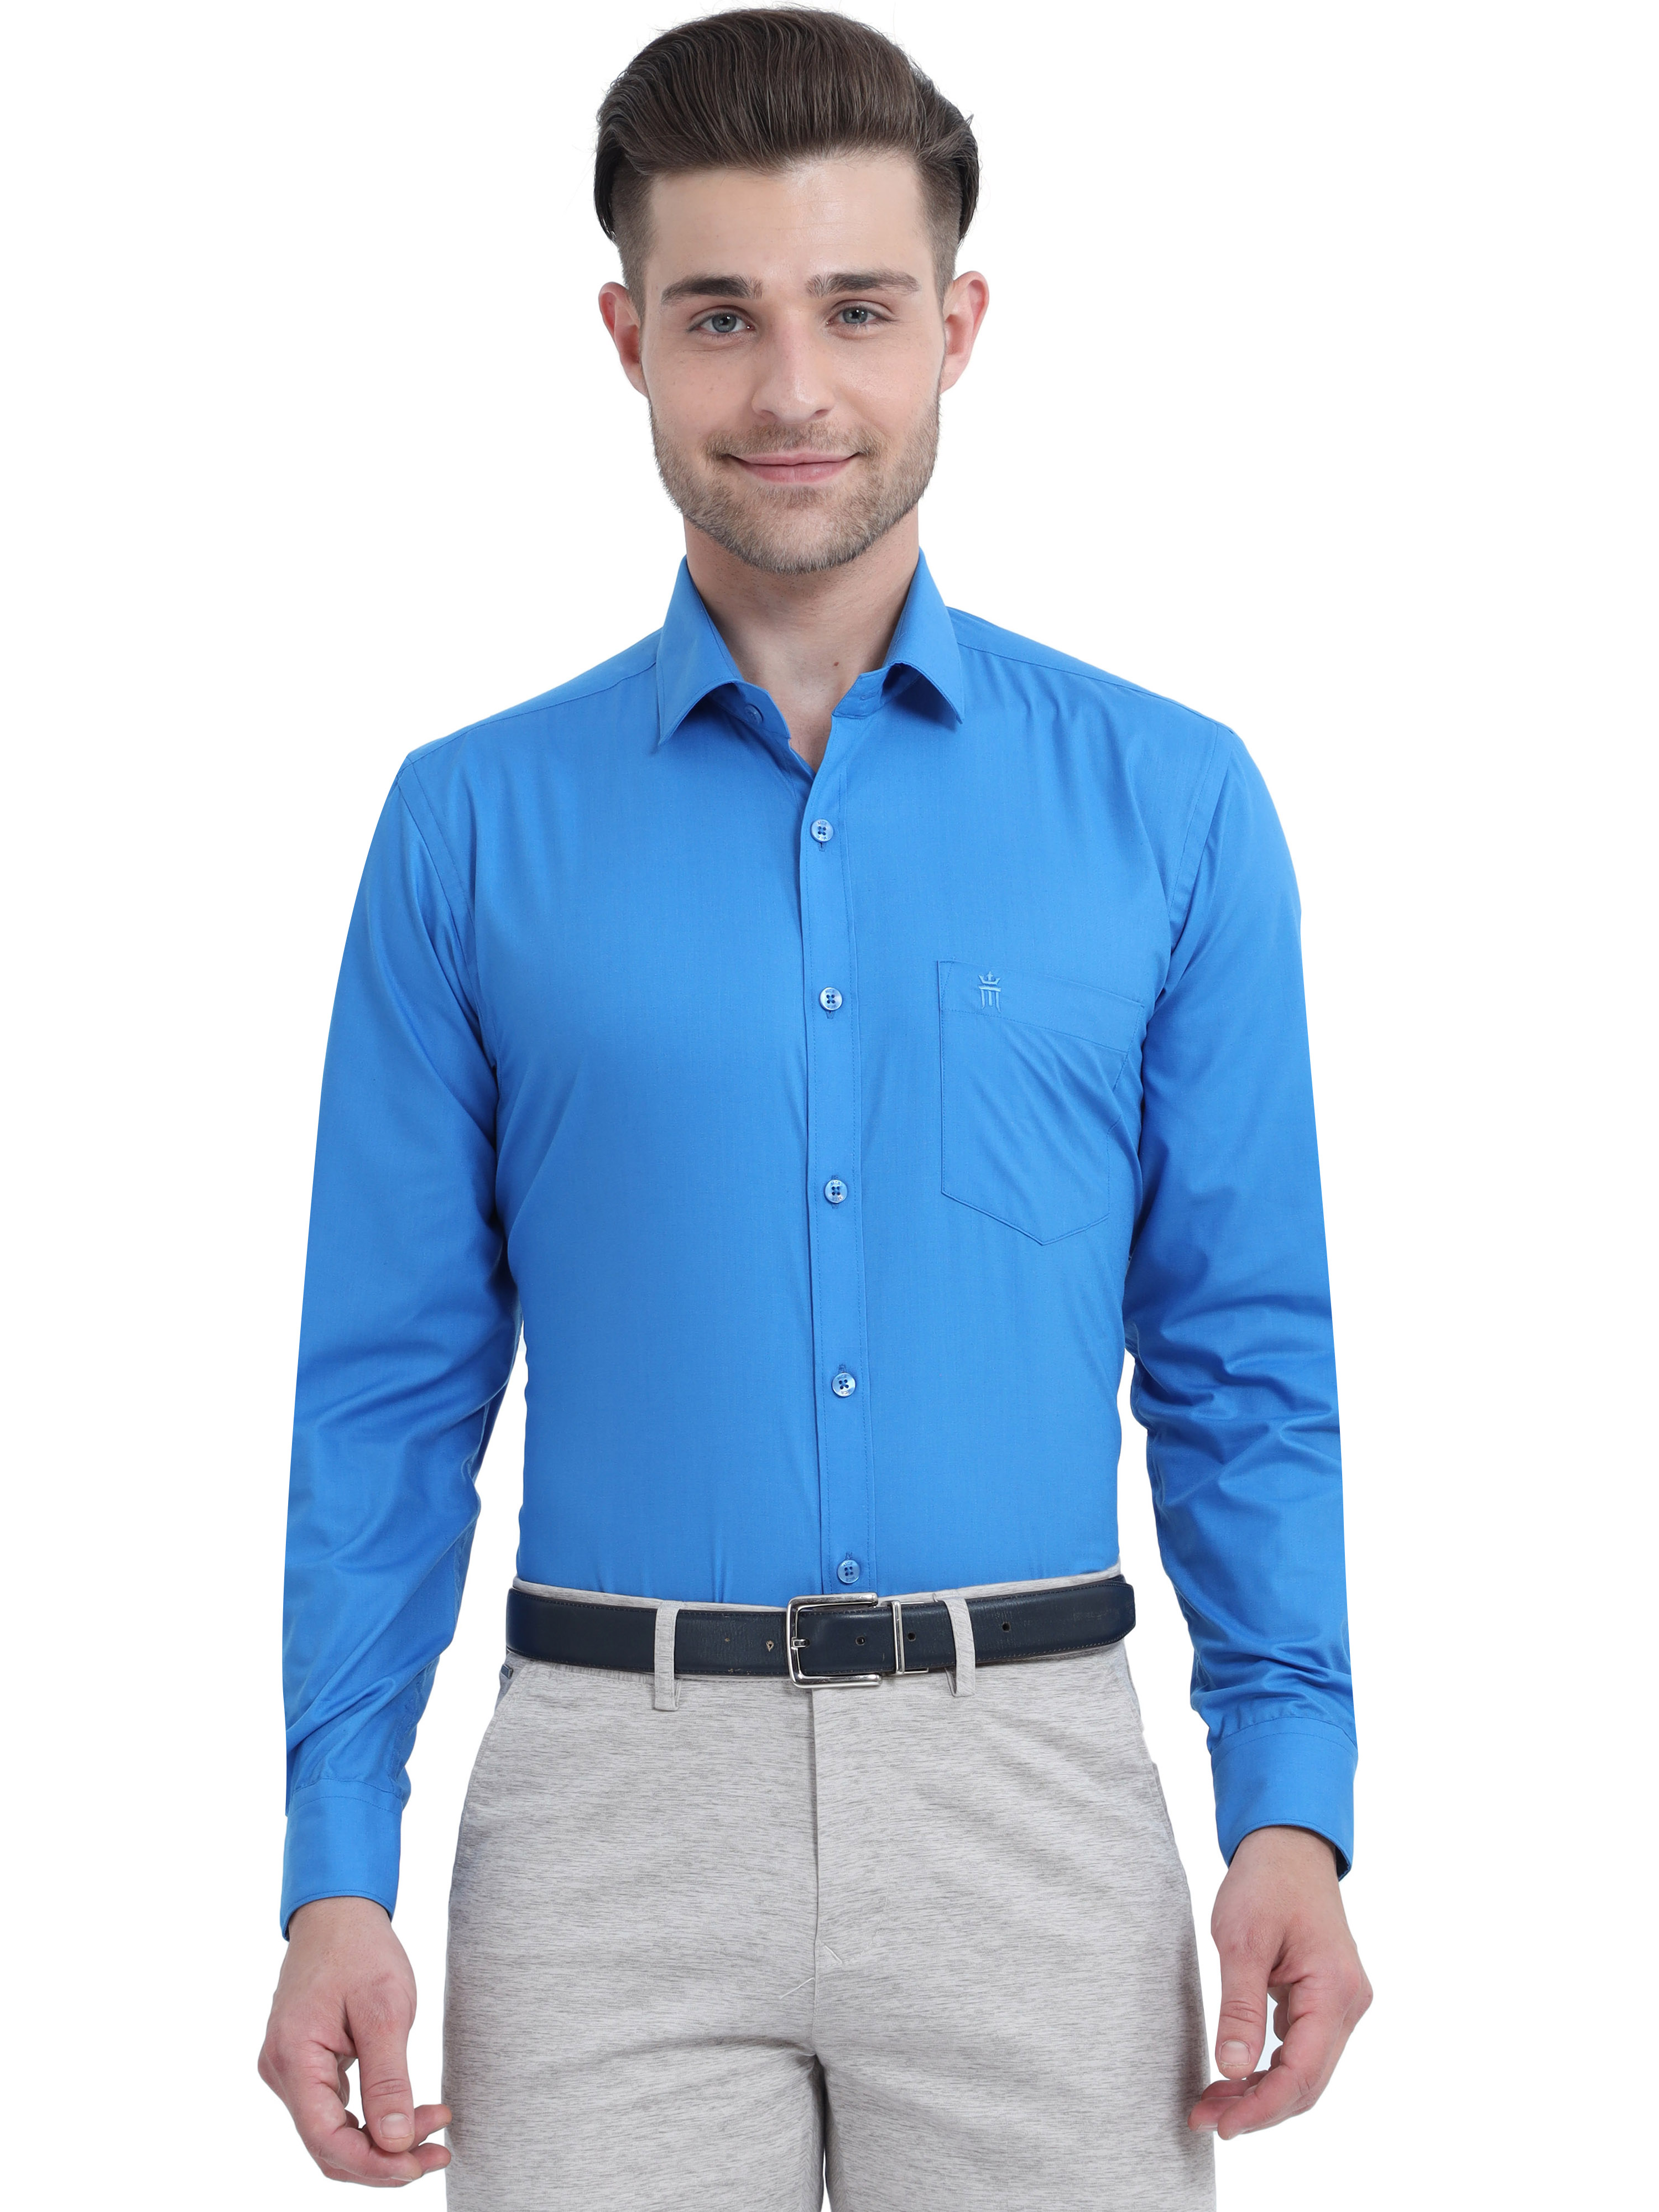 Purchase Stain Guard Shirt Blue Colour Full Sleeve